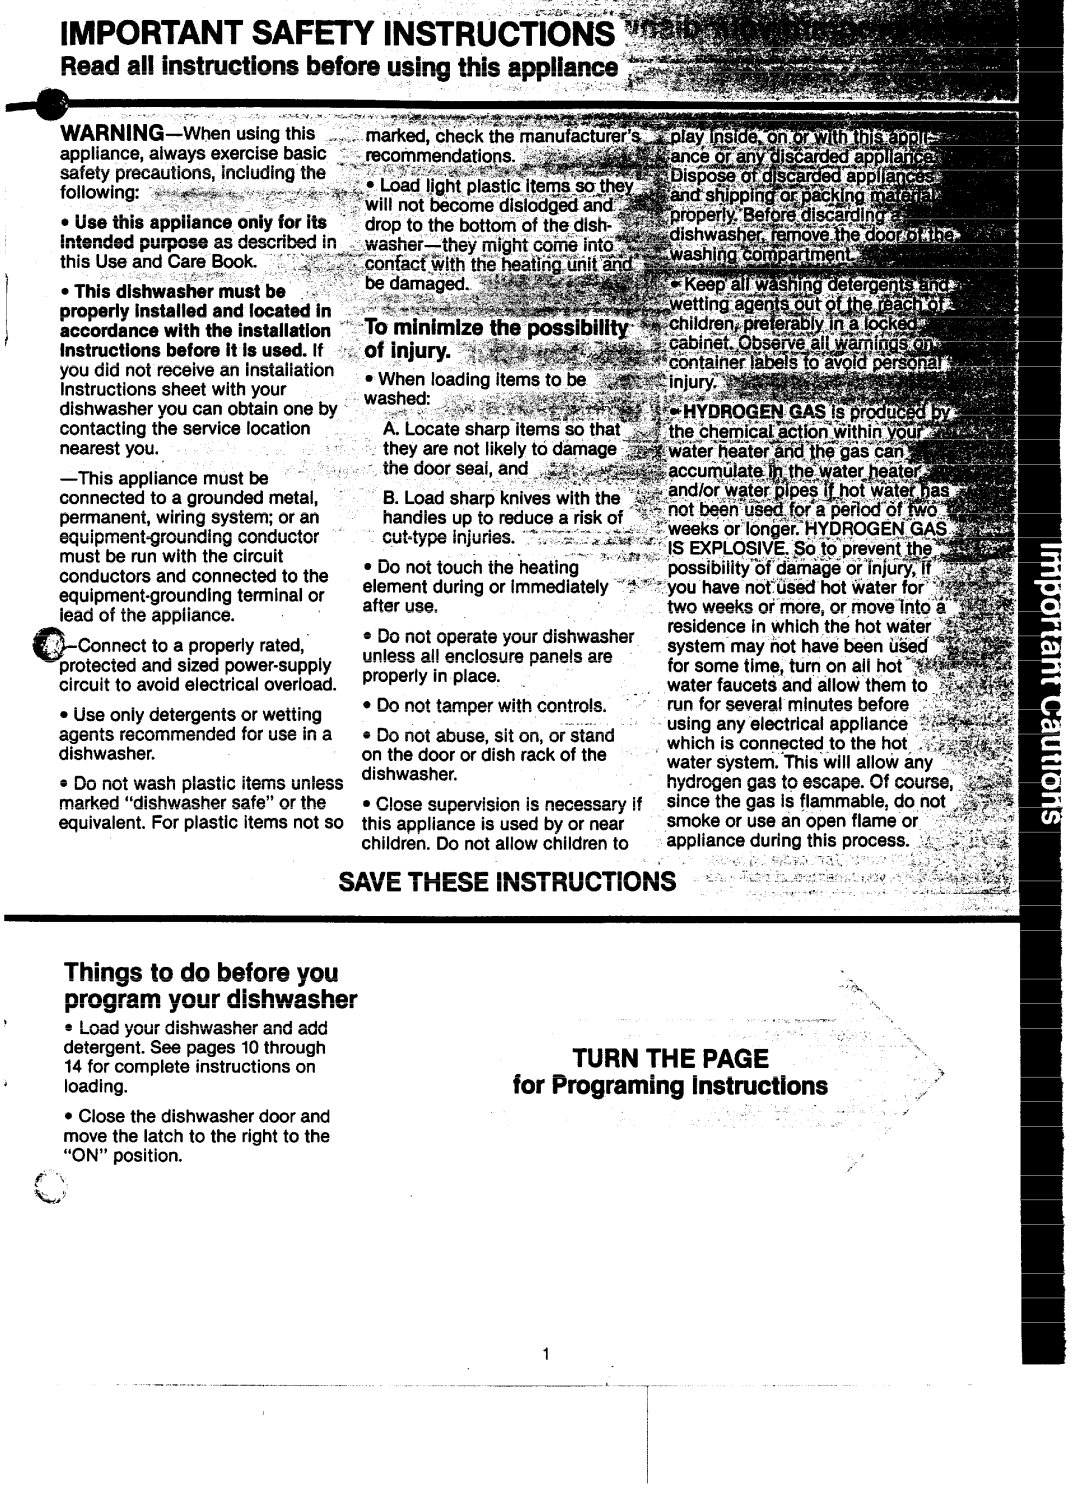 GE GSD2600D IMPORTANT SAFETY iNSTRUCTIOB& @%=, ‘2.’.”, Things to do before you program your dishwasher, Turn The Page “ 